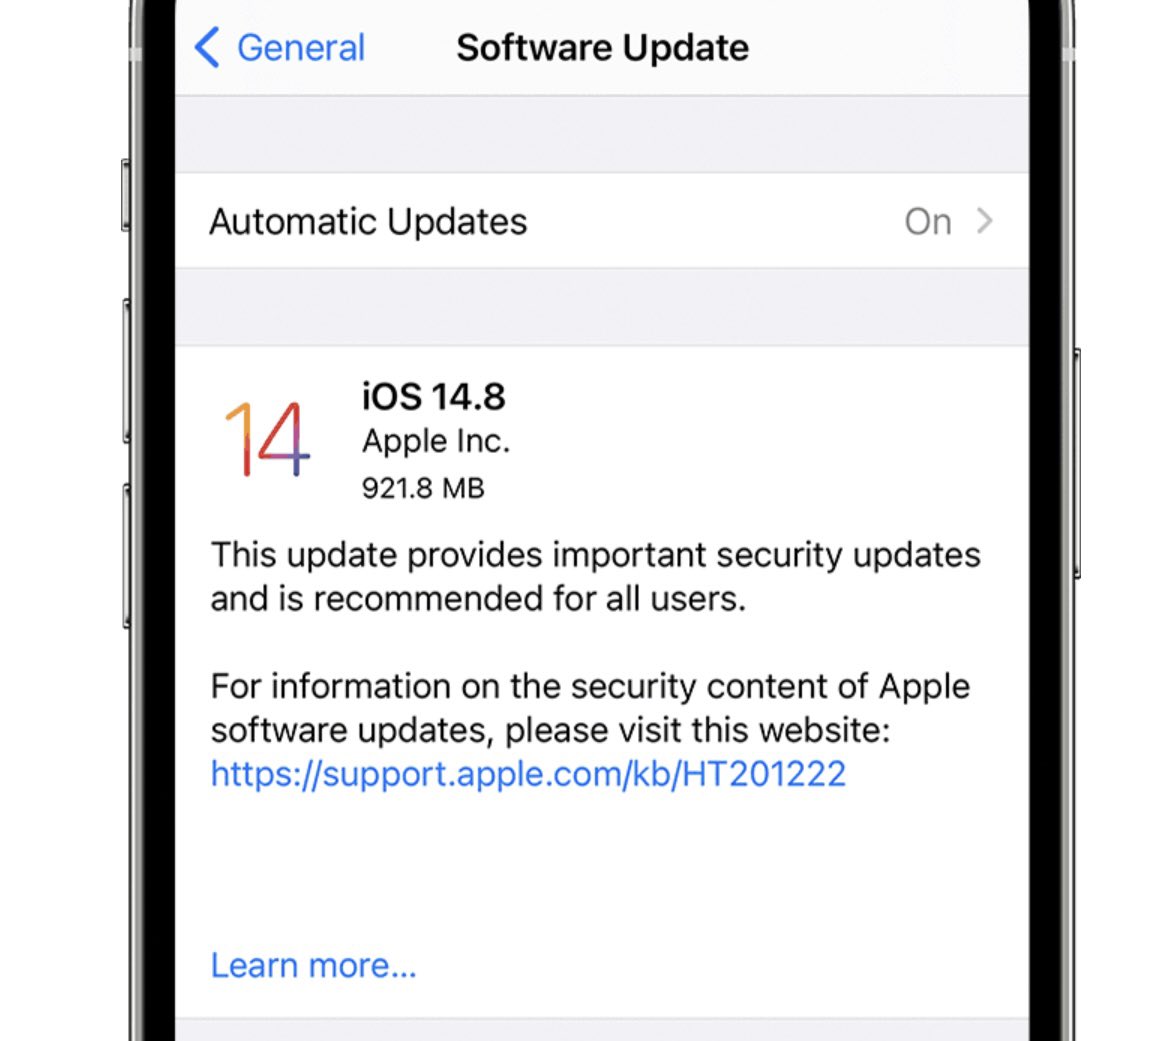 #Alert: If you haven’t done it yet, update your Apple device now. There’s a security risk. Here’s how: -Go to Settings -Tap General -Tap Software Update.